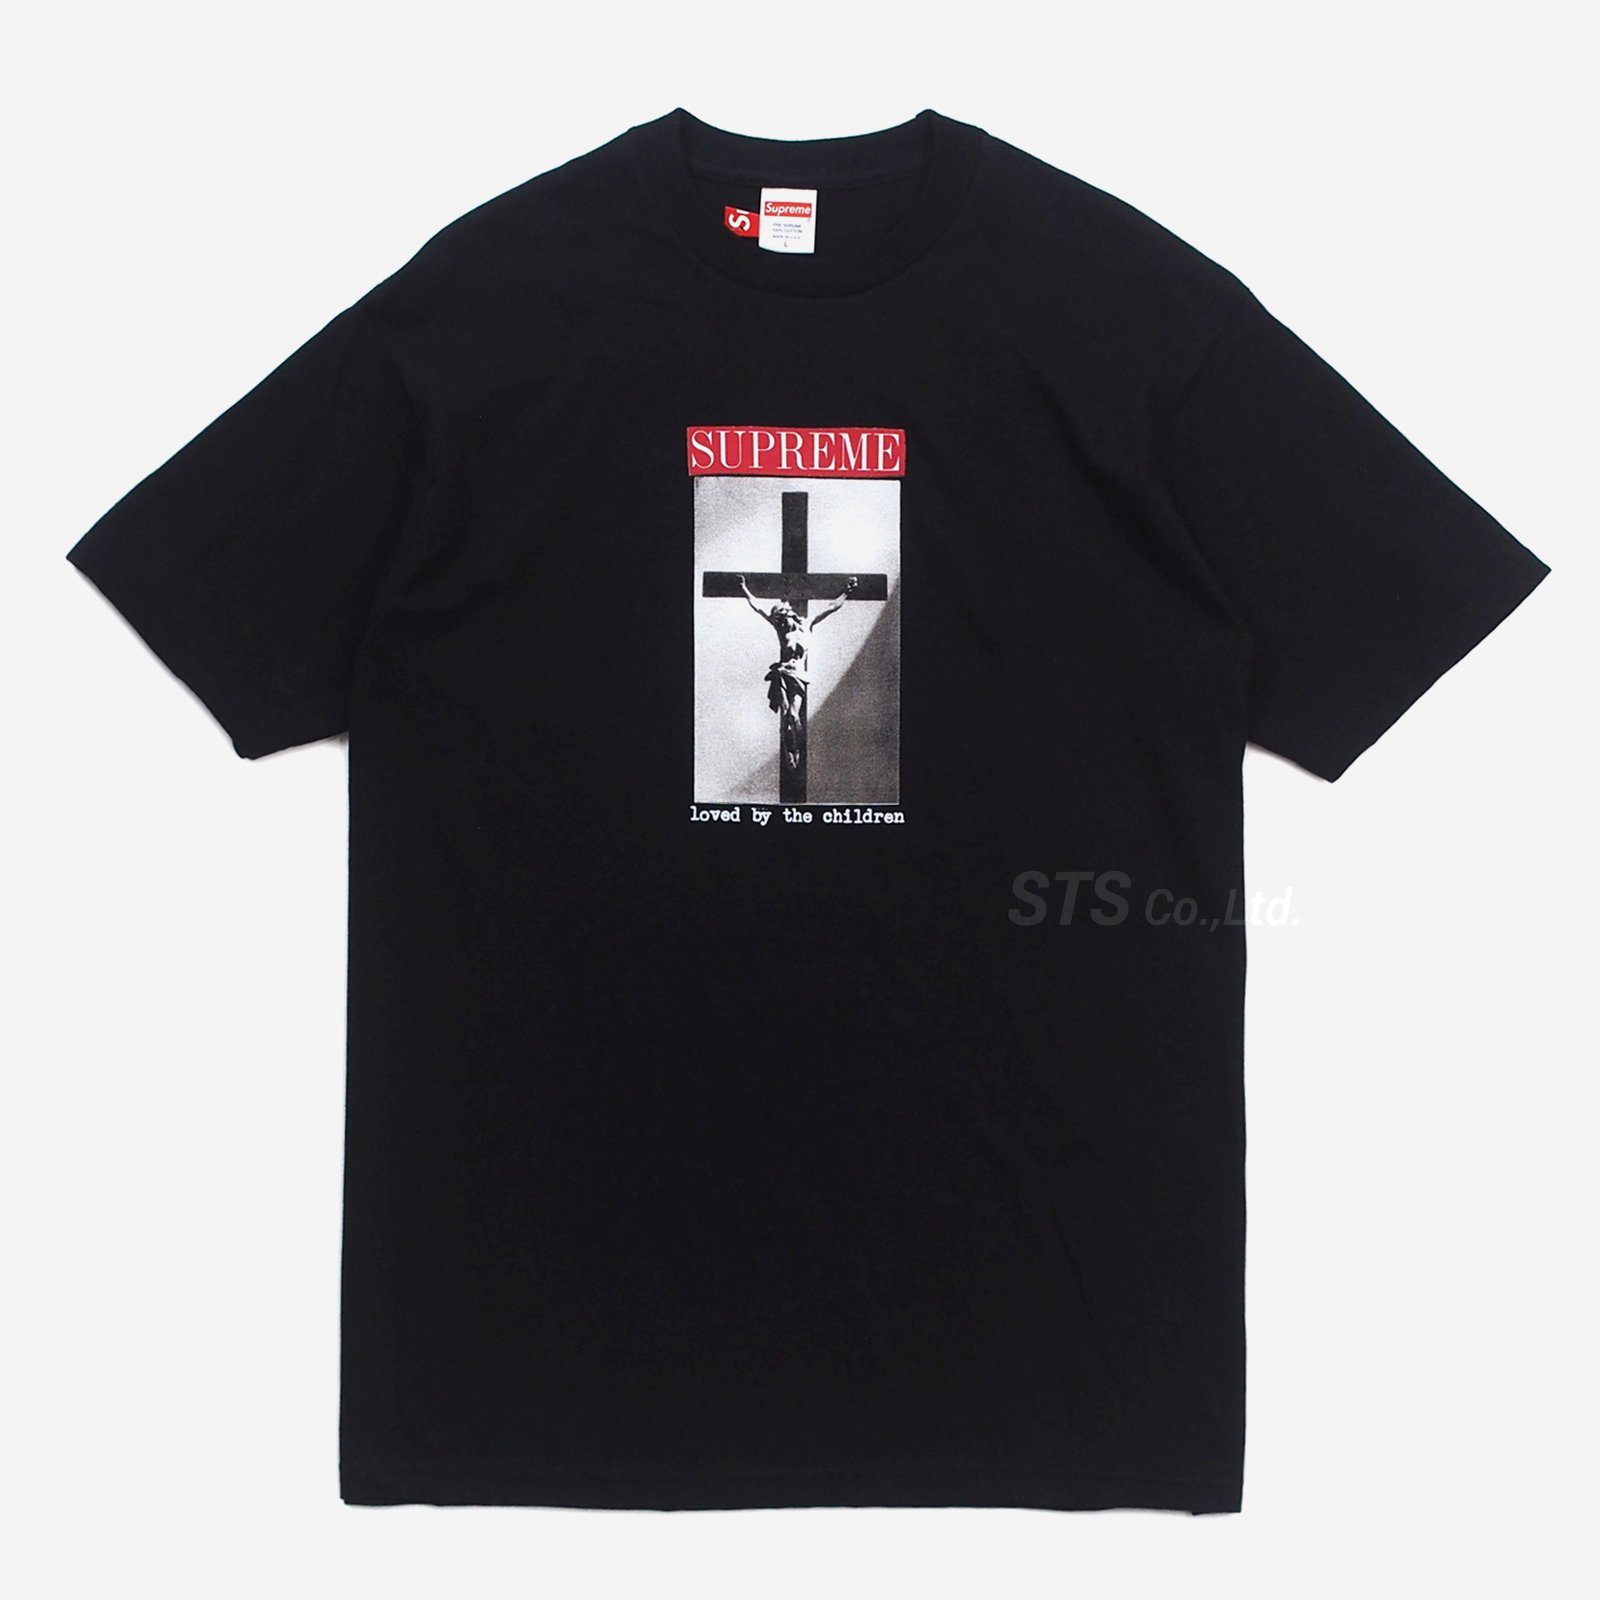 Supreme - Loved By The Children Tee - UG.SHAFT